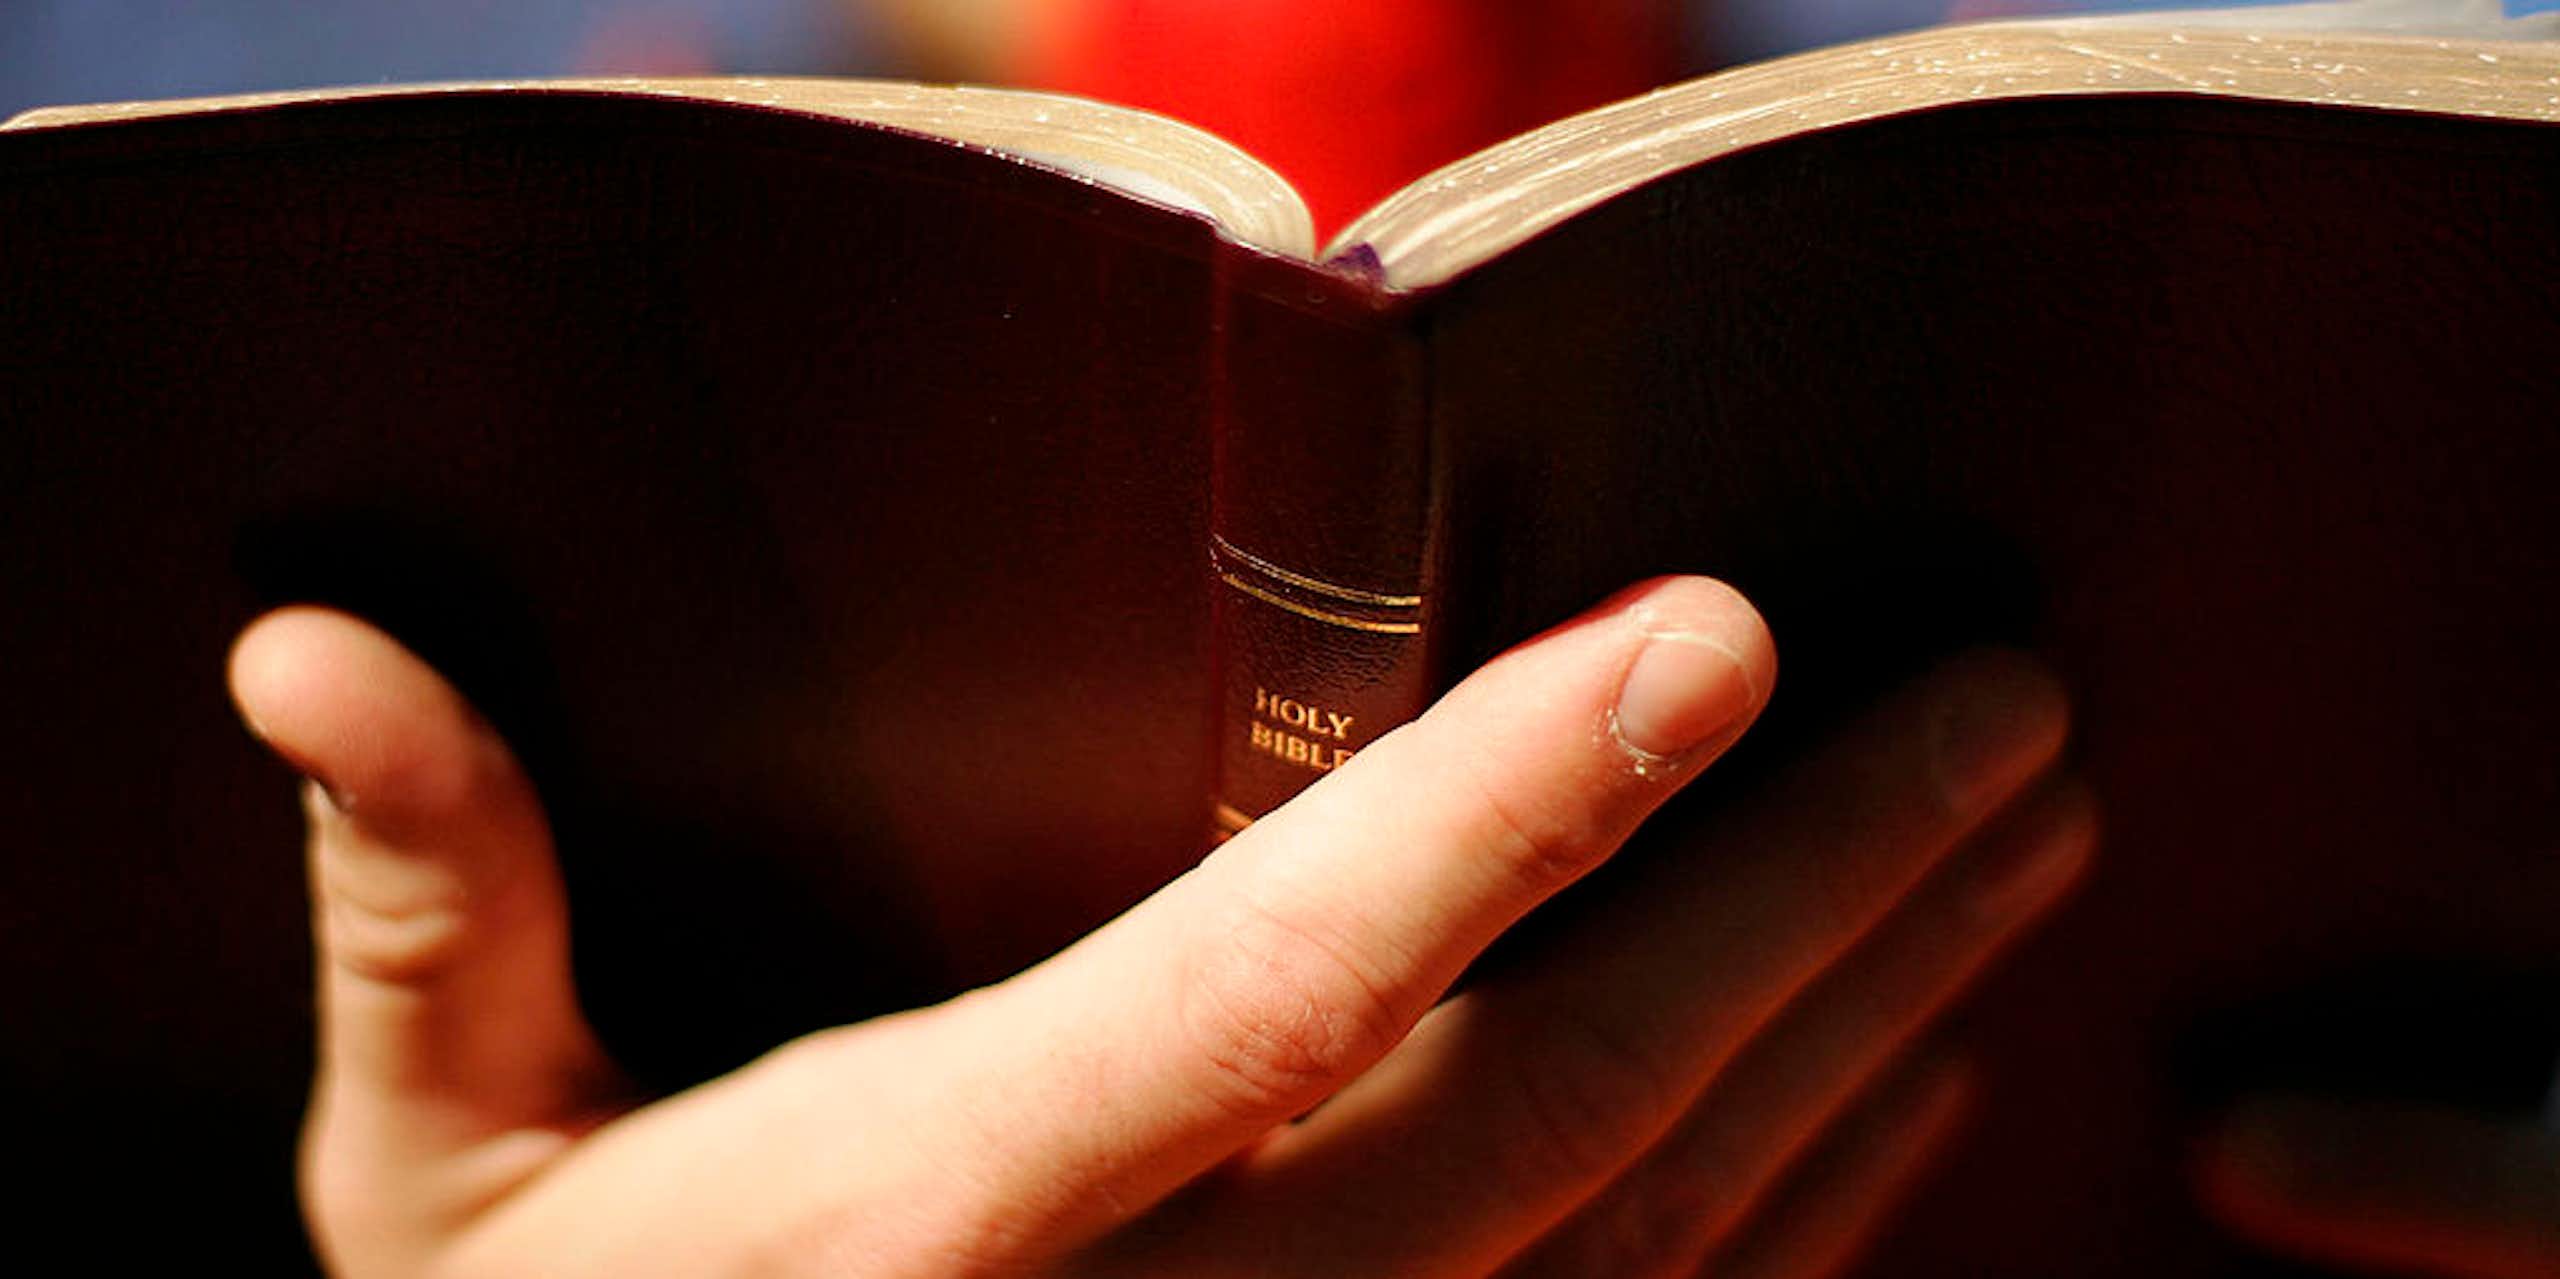 A close-up photo of a Bible held by a person with red duct tape over their mouth.